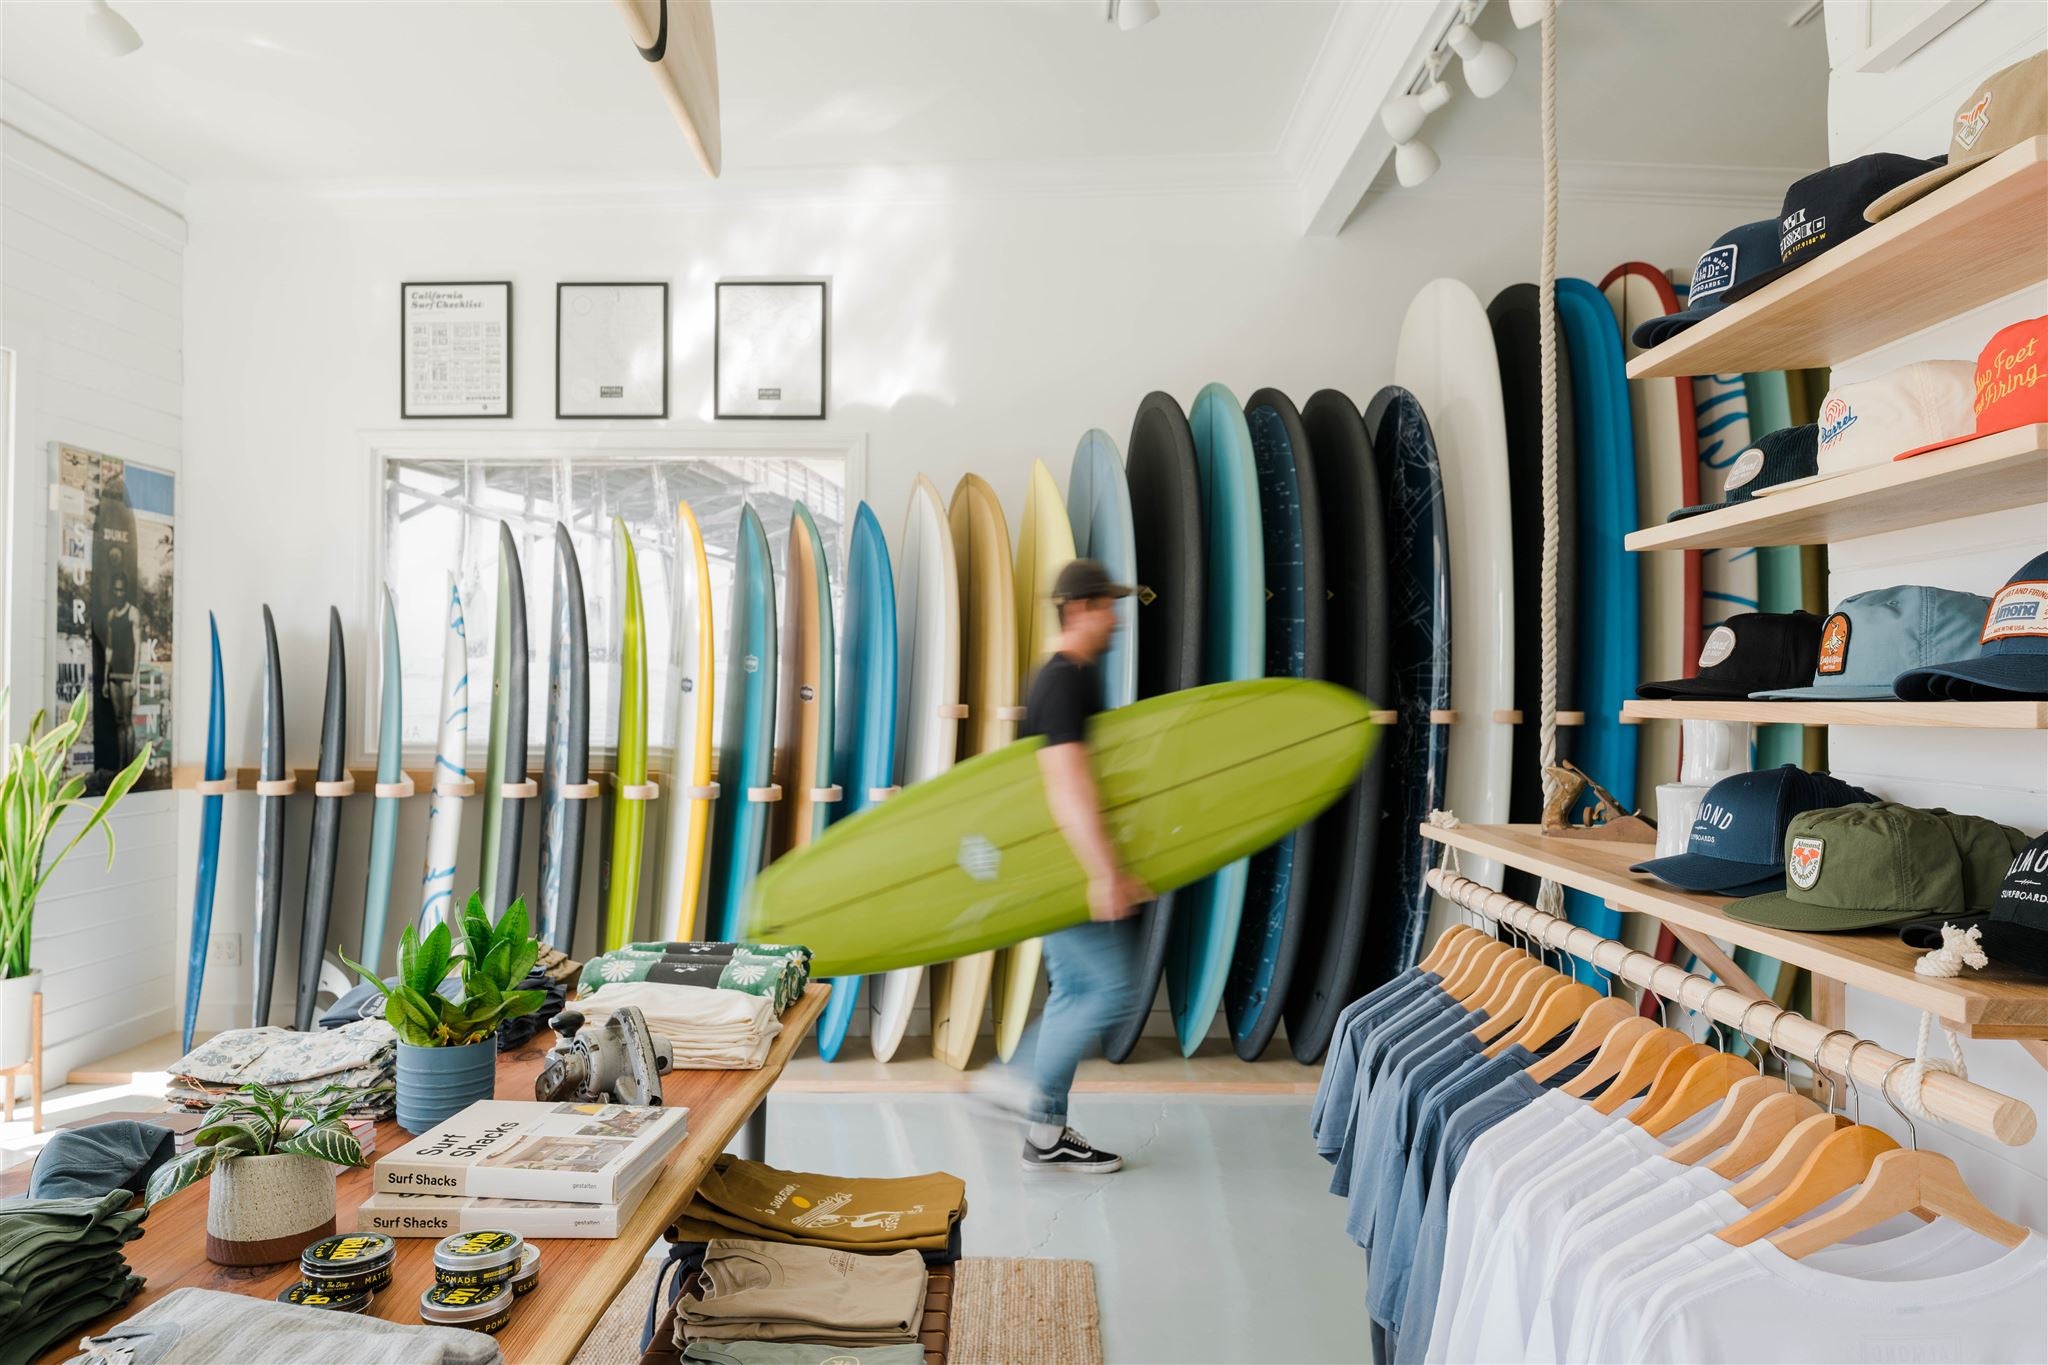 Almond Surf Shop by His & Hers Creative